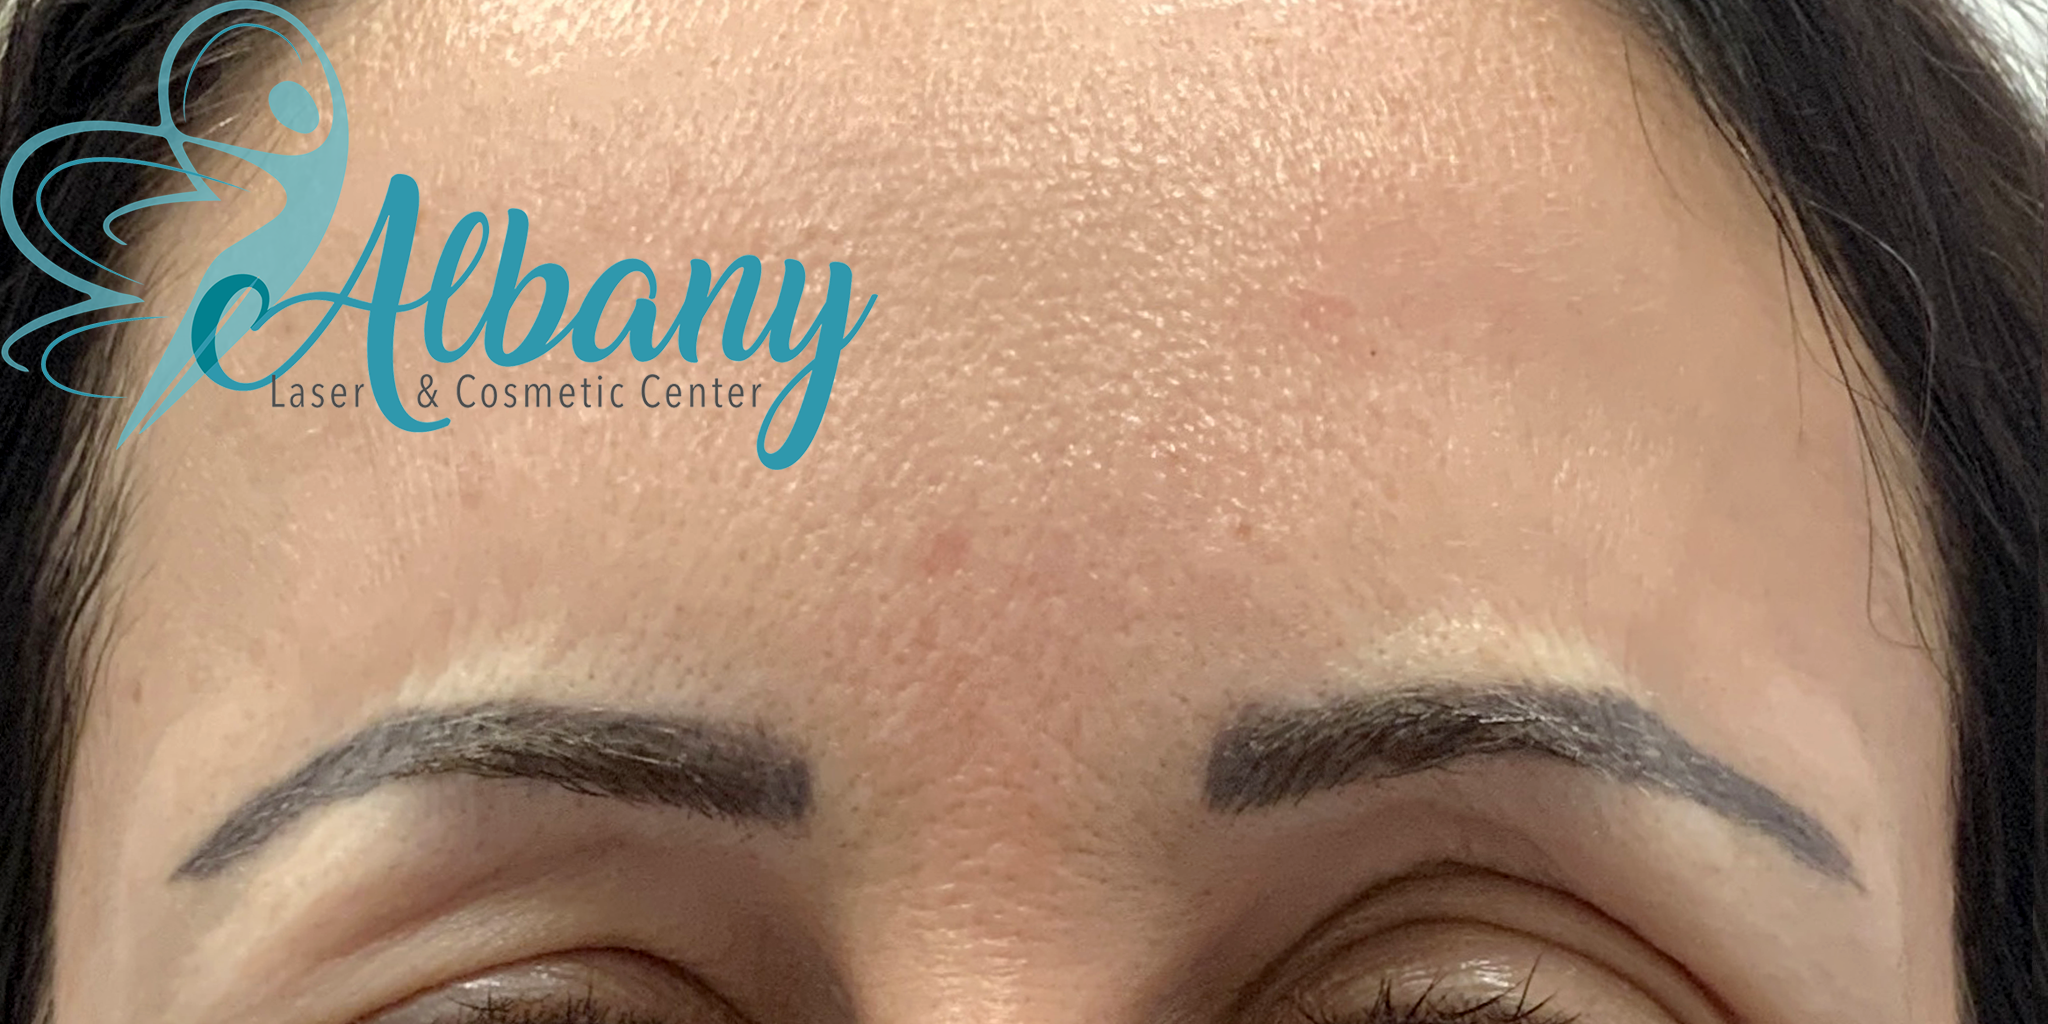 After picture of a patient's forehead demonstrating a significant reduction in frown lines and wrinkles following treatment at Albany Cosmetic and Laser Centre in Edmonton